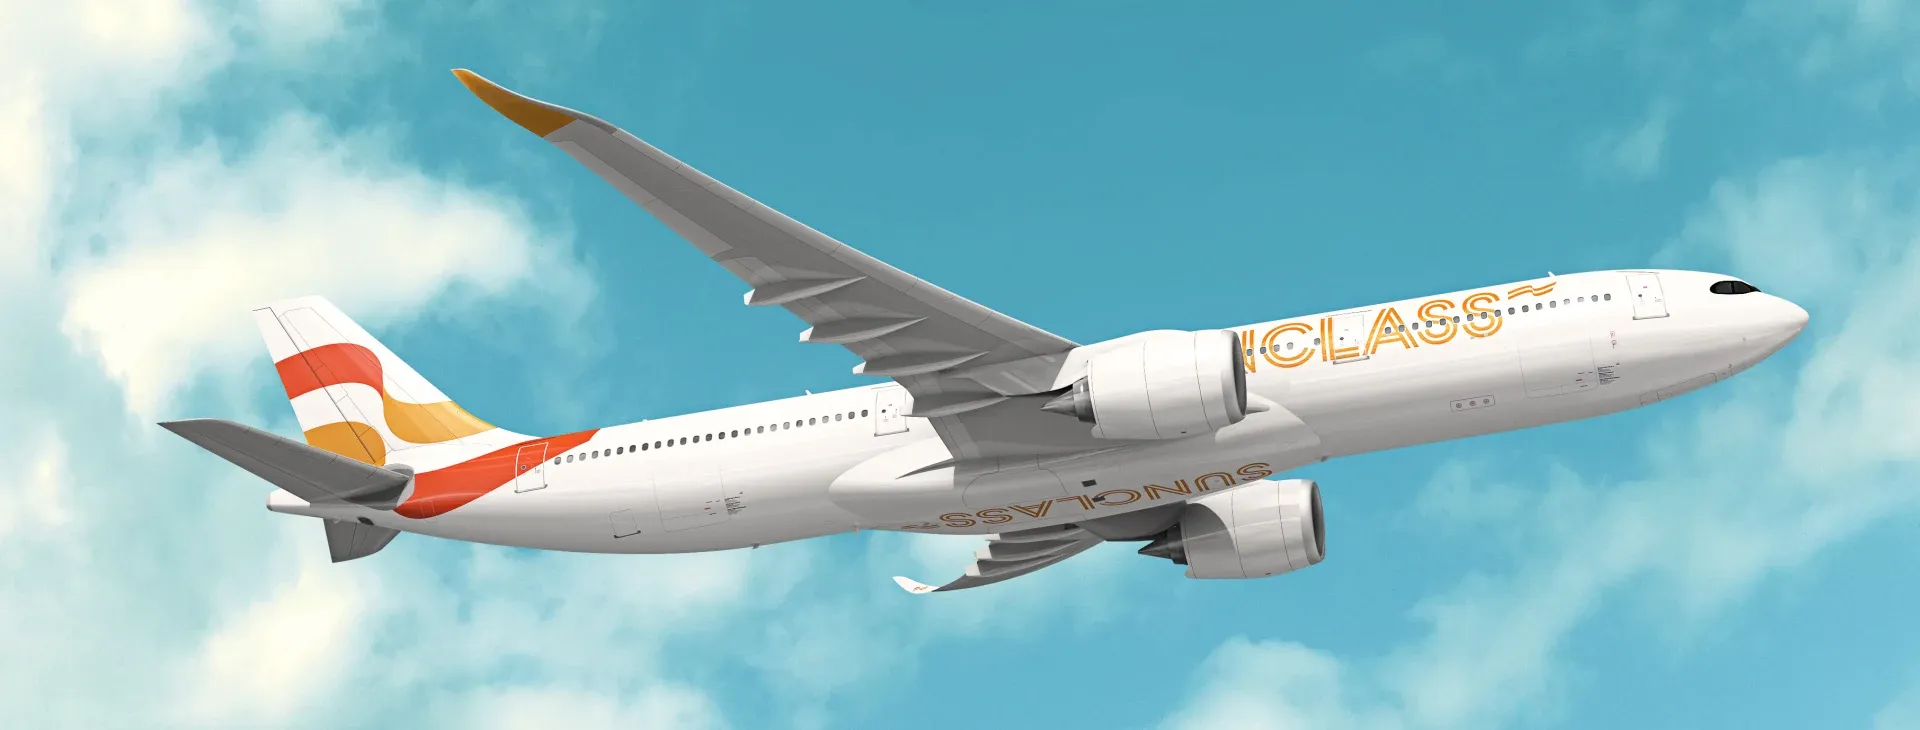 Sunclass Airlines A330neo